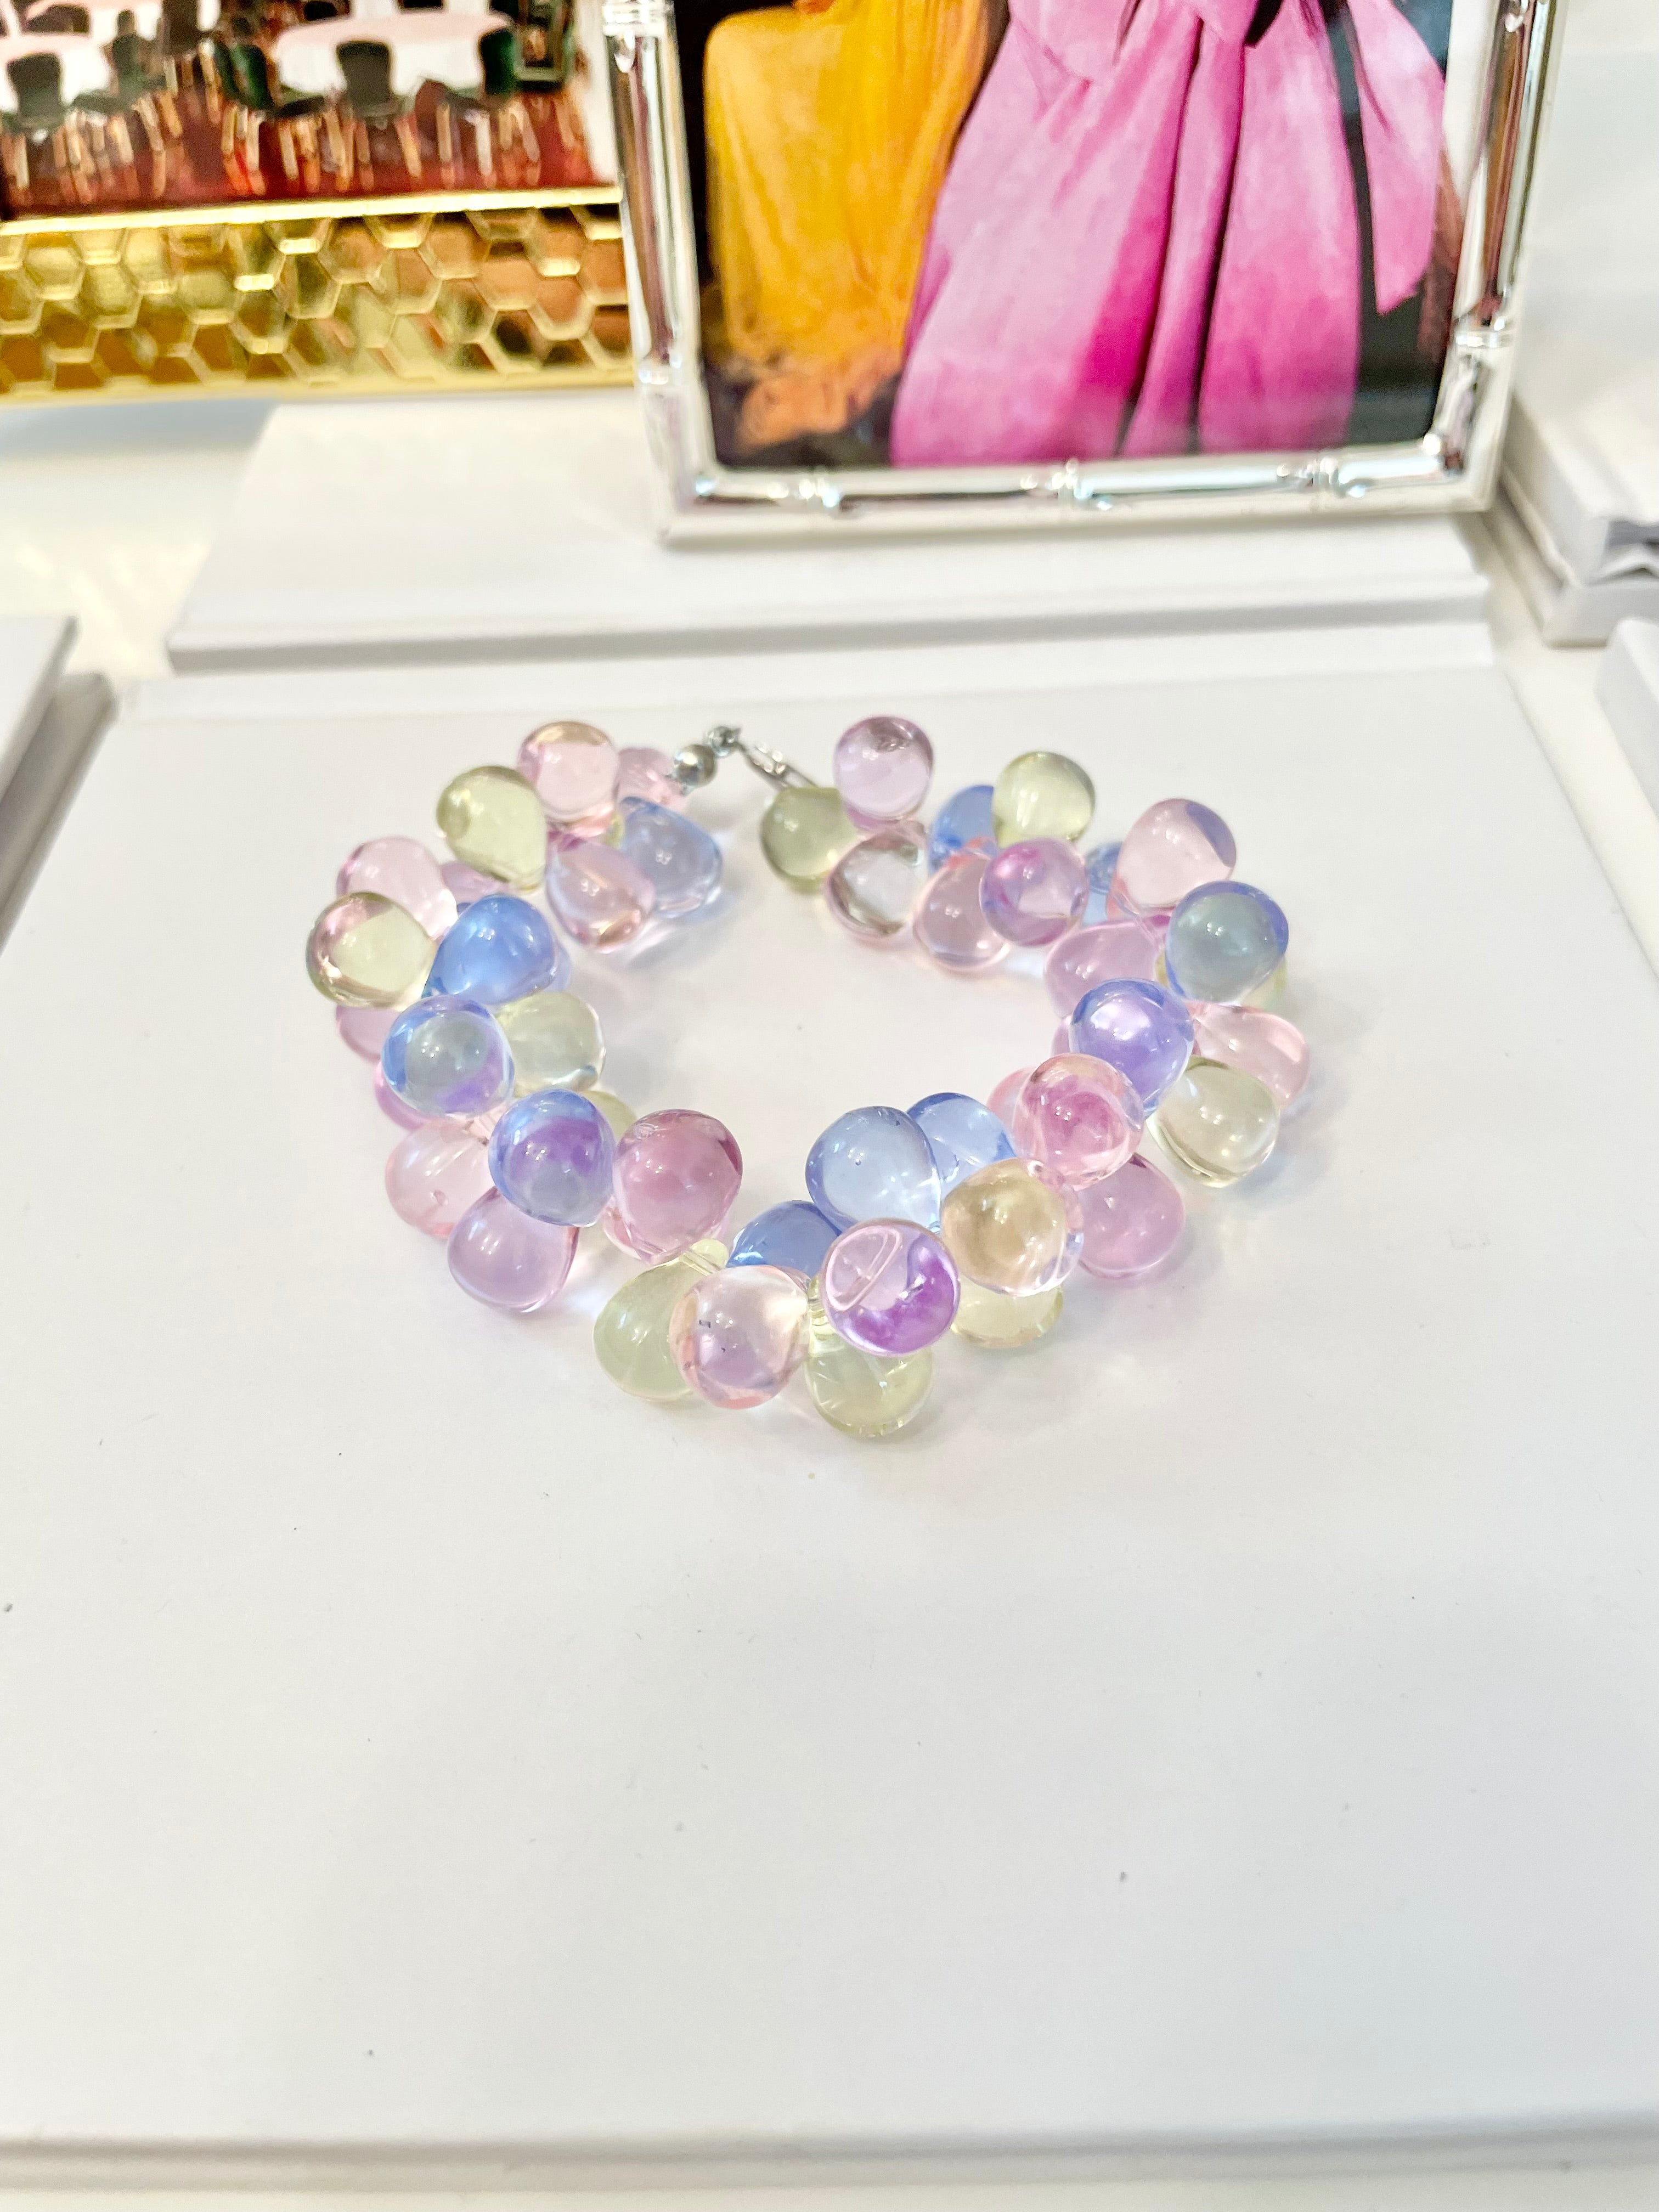 The happy hostess and her love of color.. This lucite bracelet is truly divine.